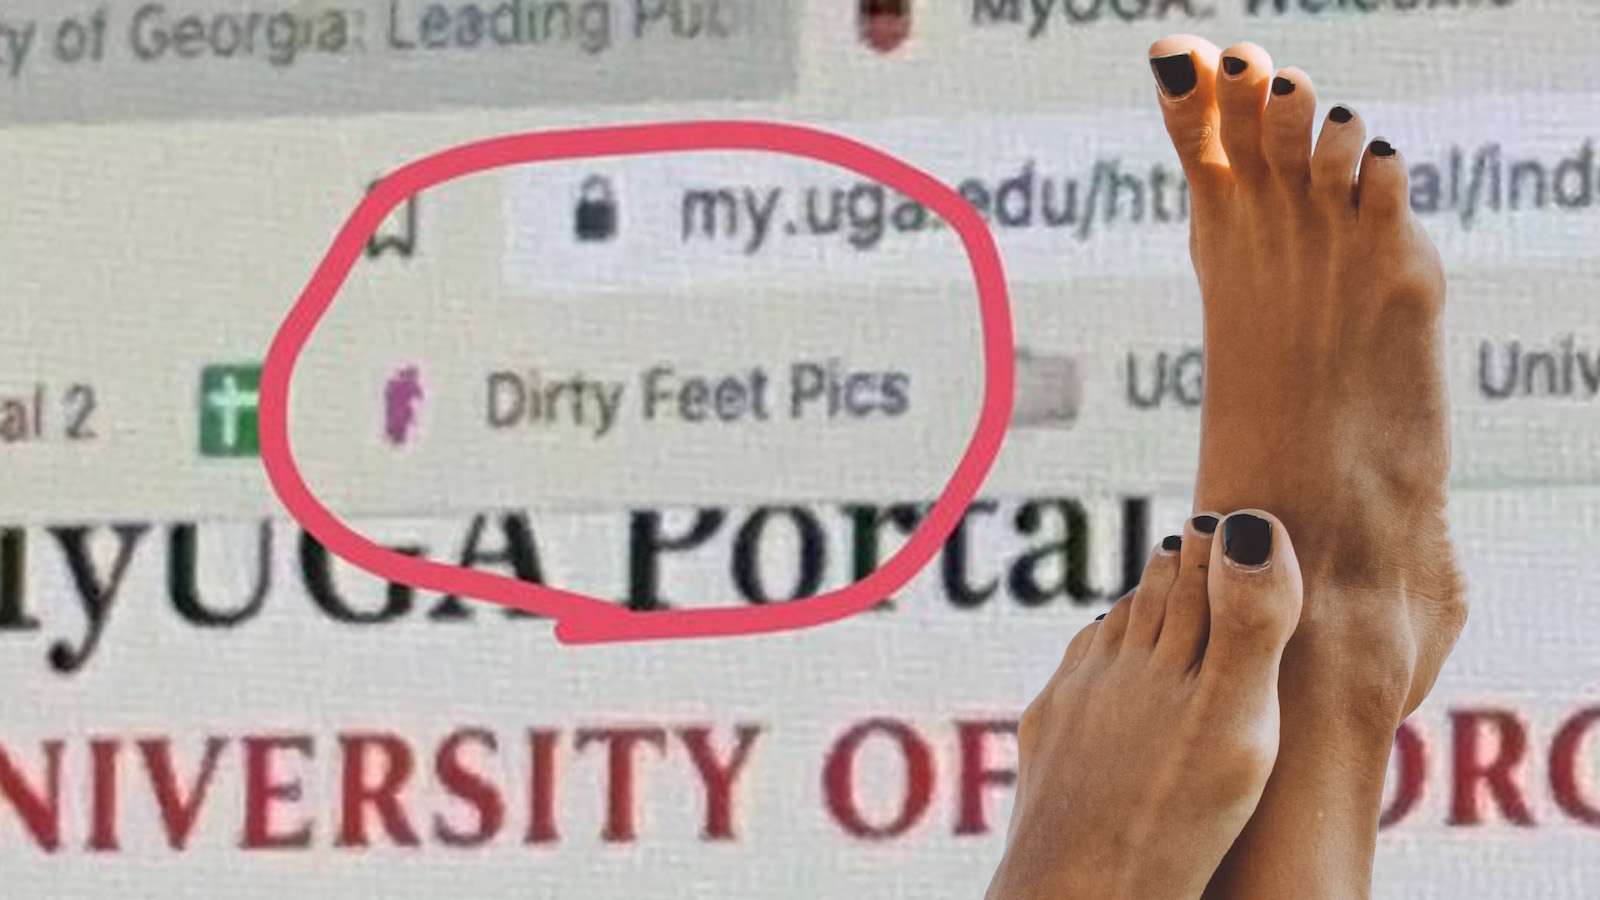 Professor trolled online after screen-share with students exposes kink